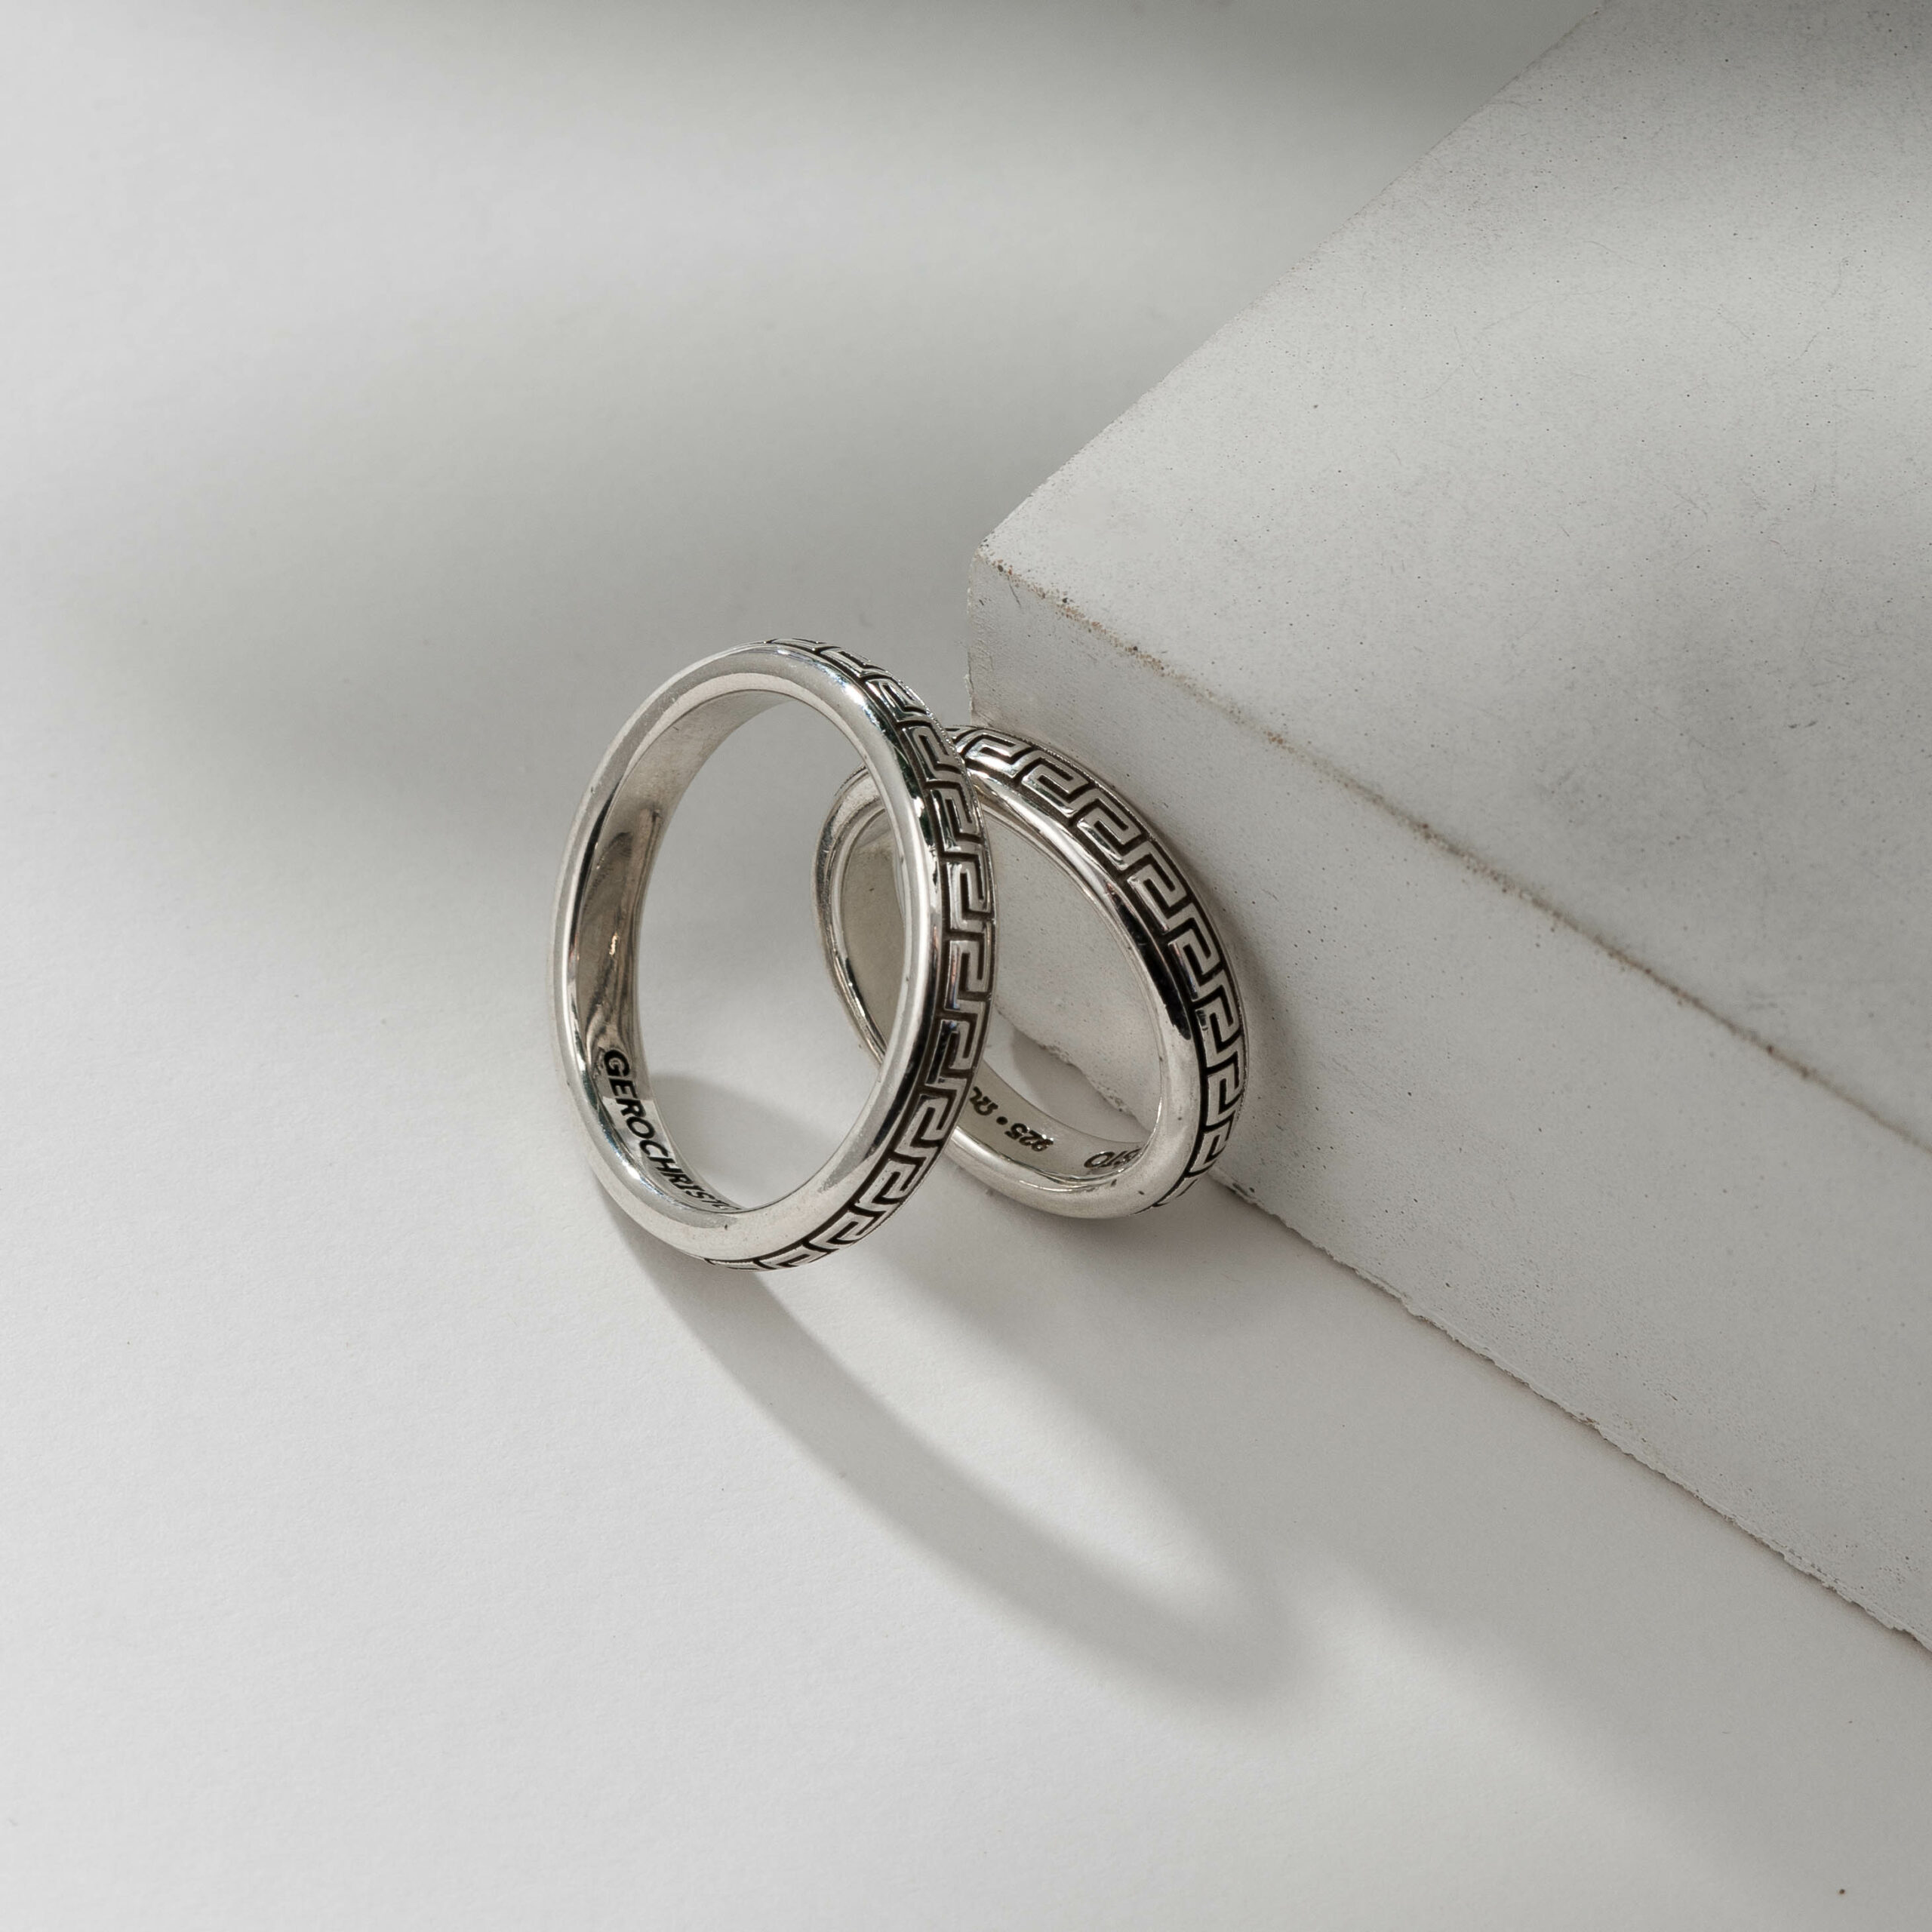 Meander band ring in Sterling Silver